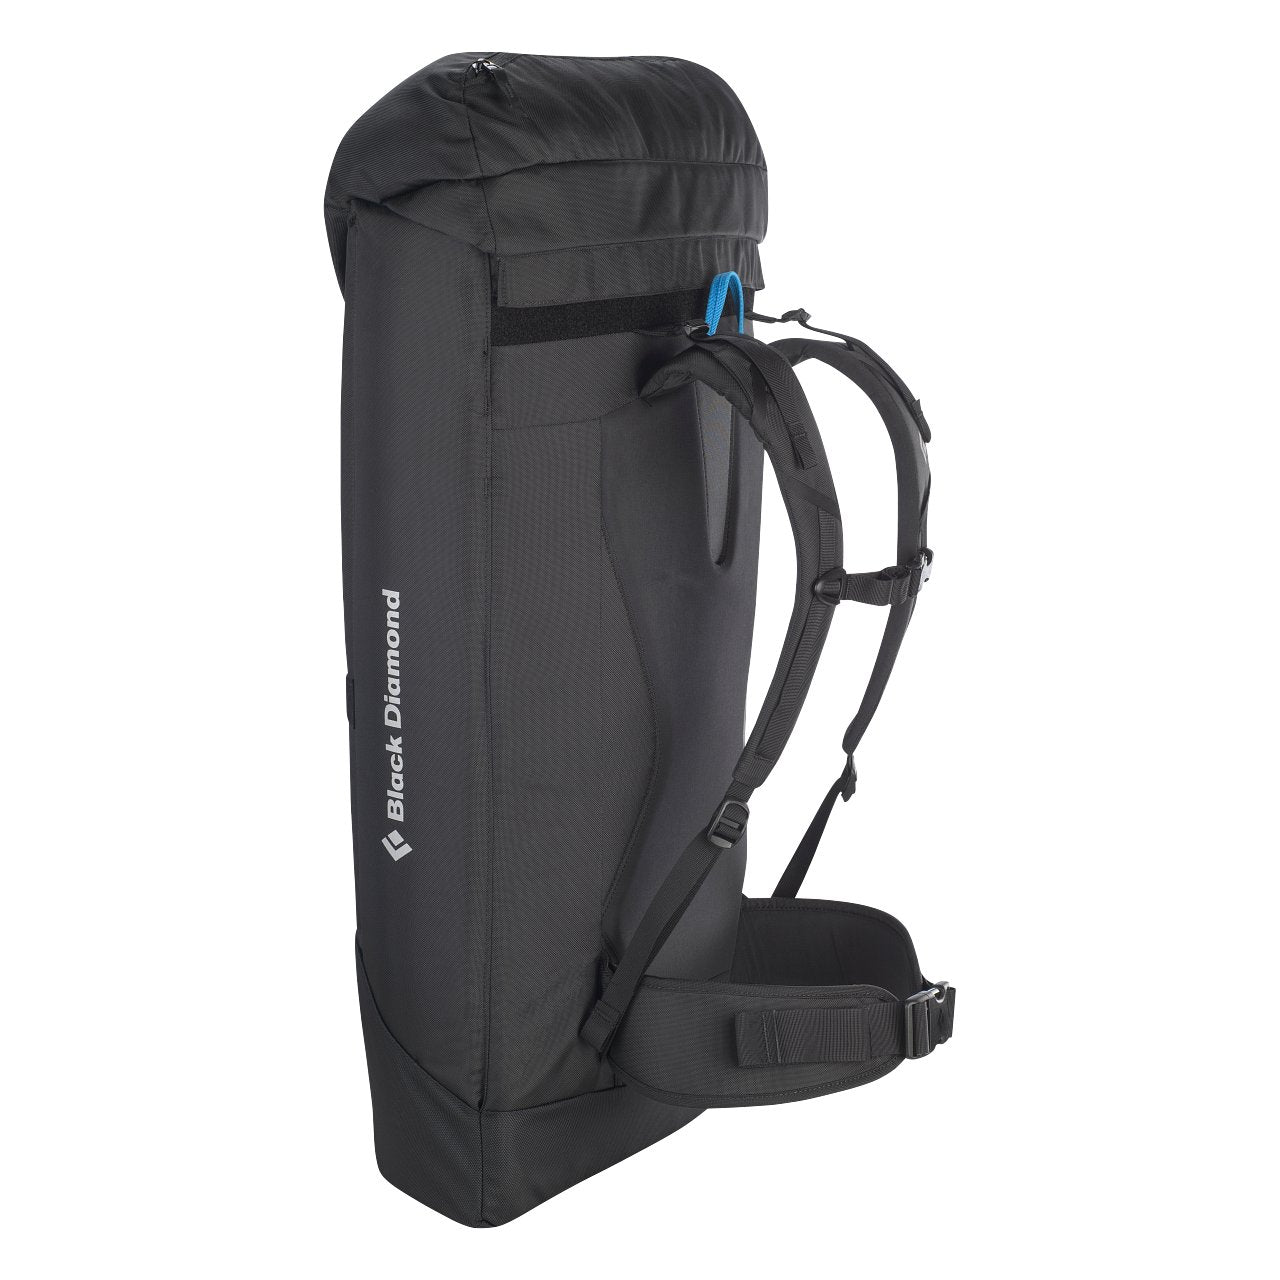 Pipe Dream (45L), climbing backpack